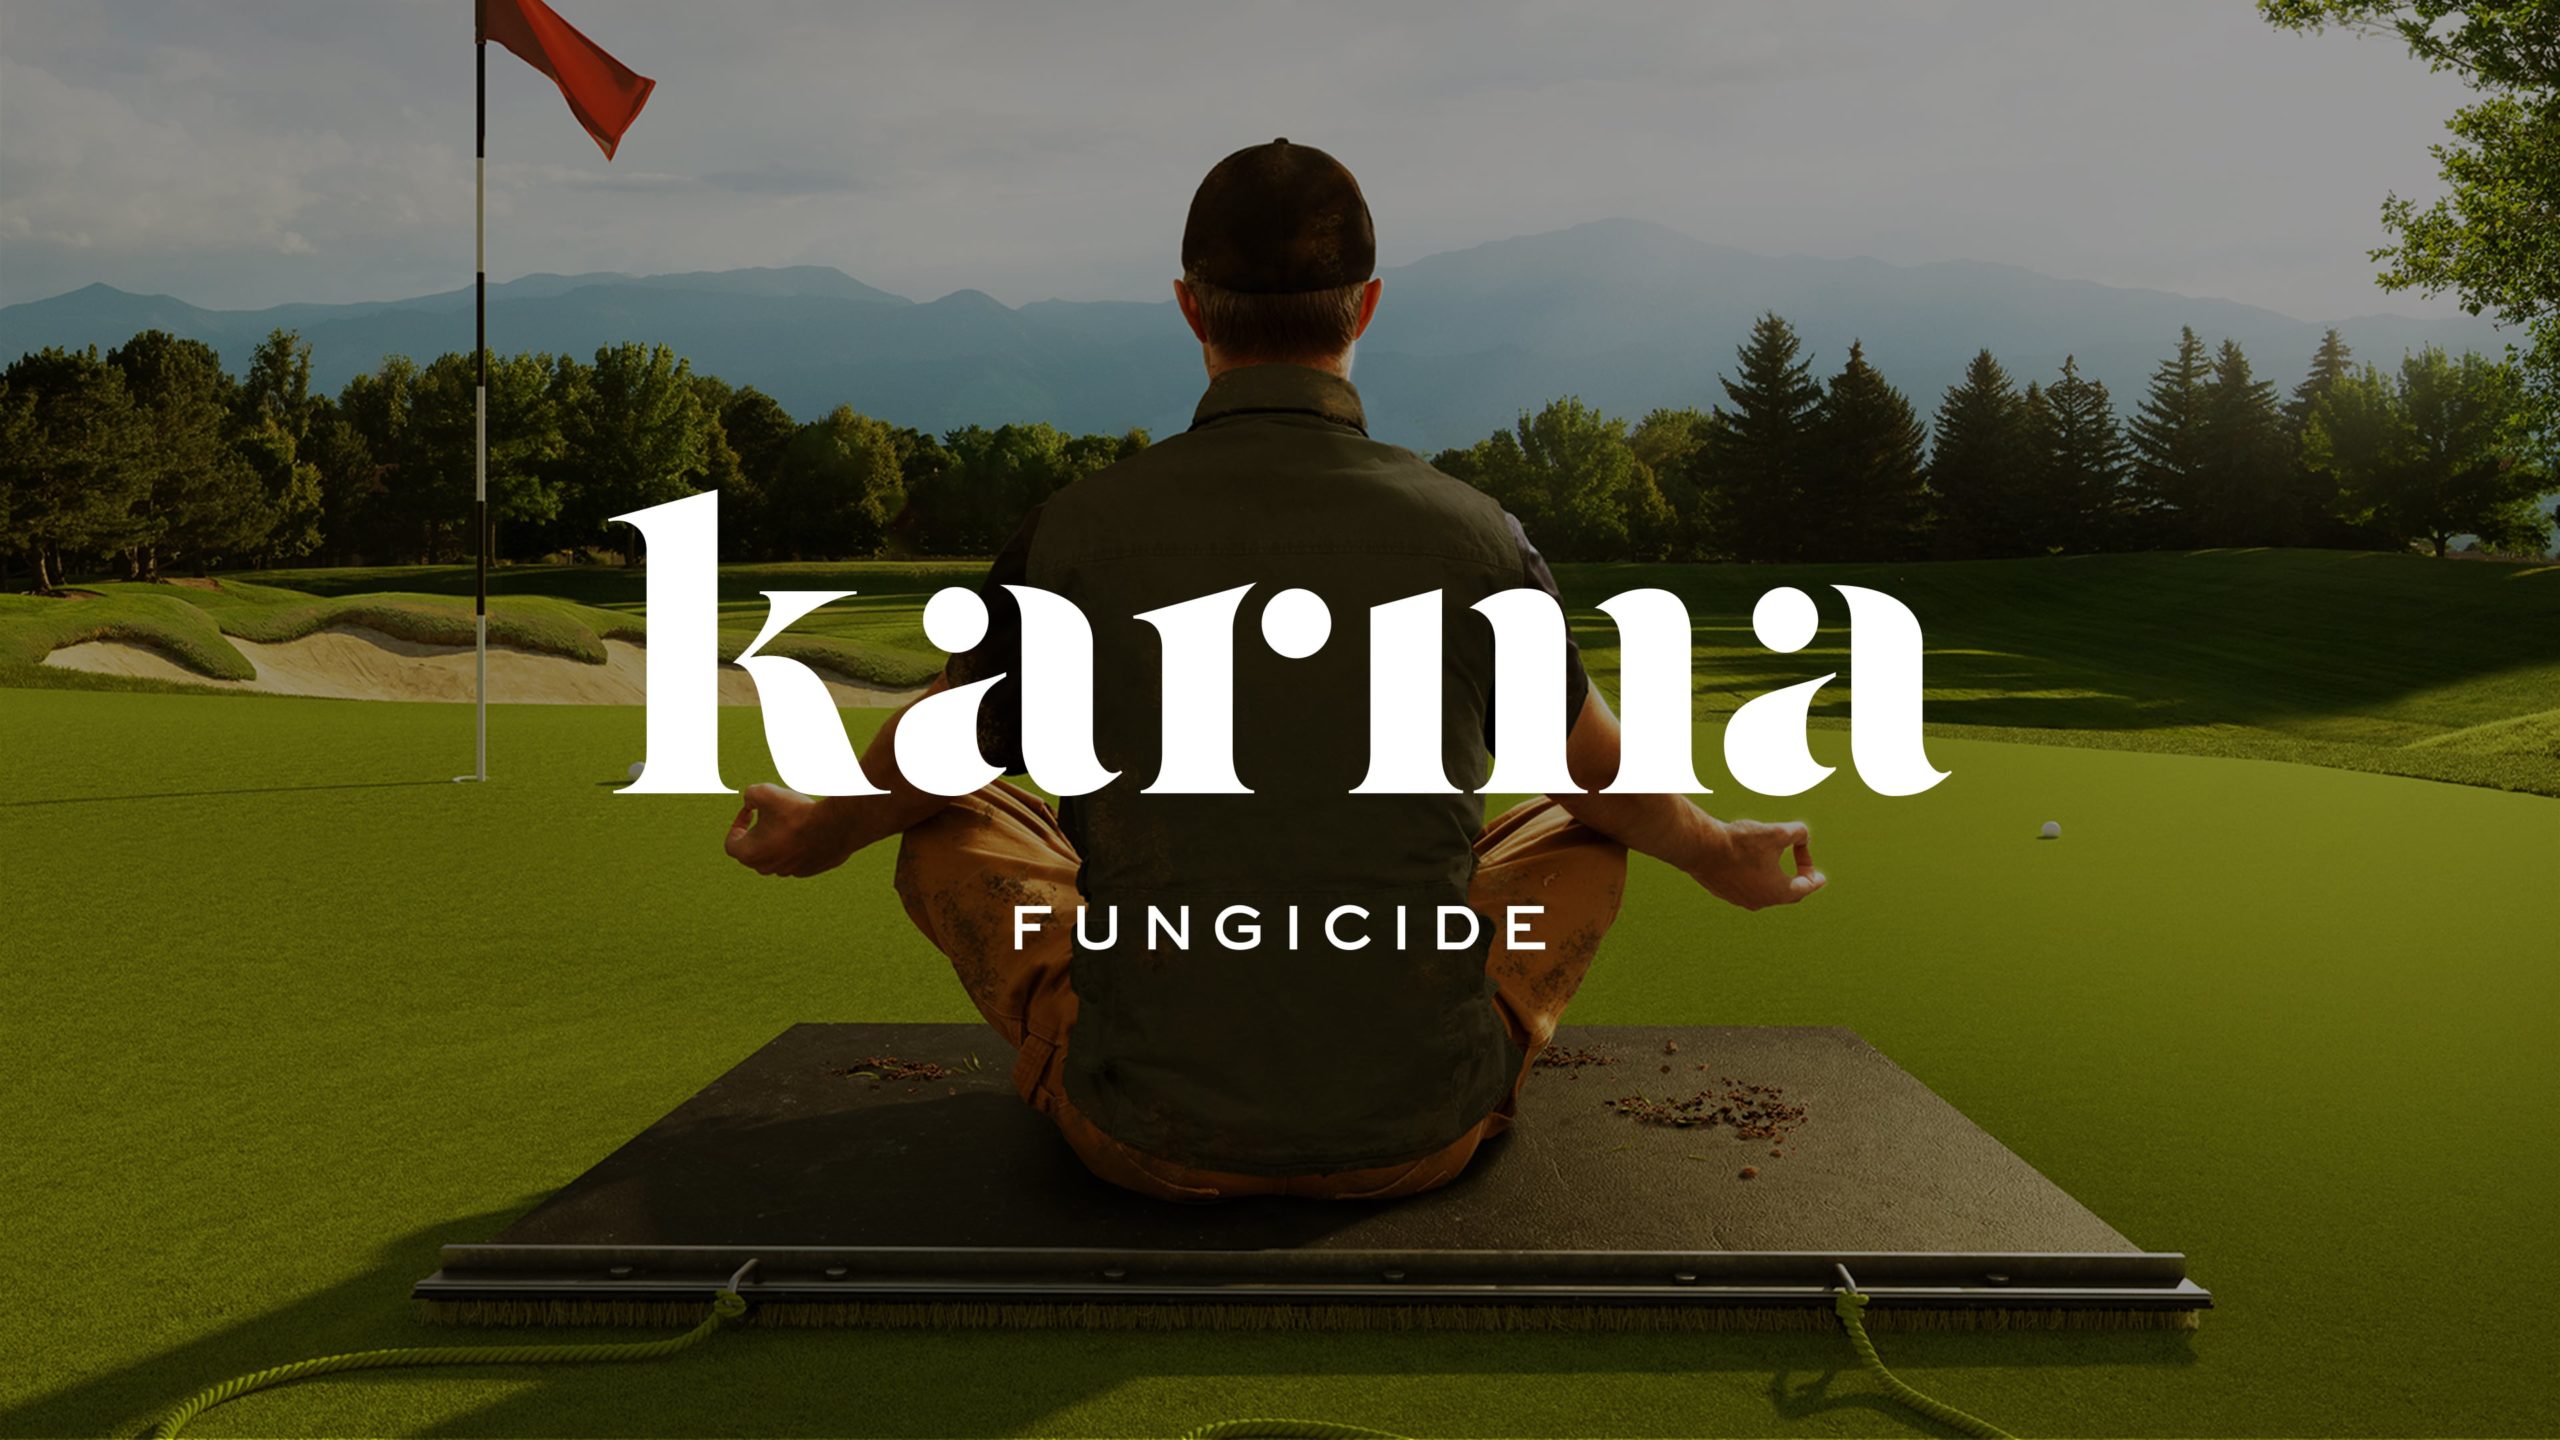 Groundskeeper Sitting and Meditating on Golf Course | Sipcam USA, Inc.